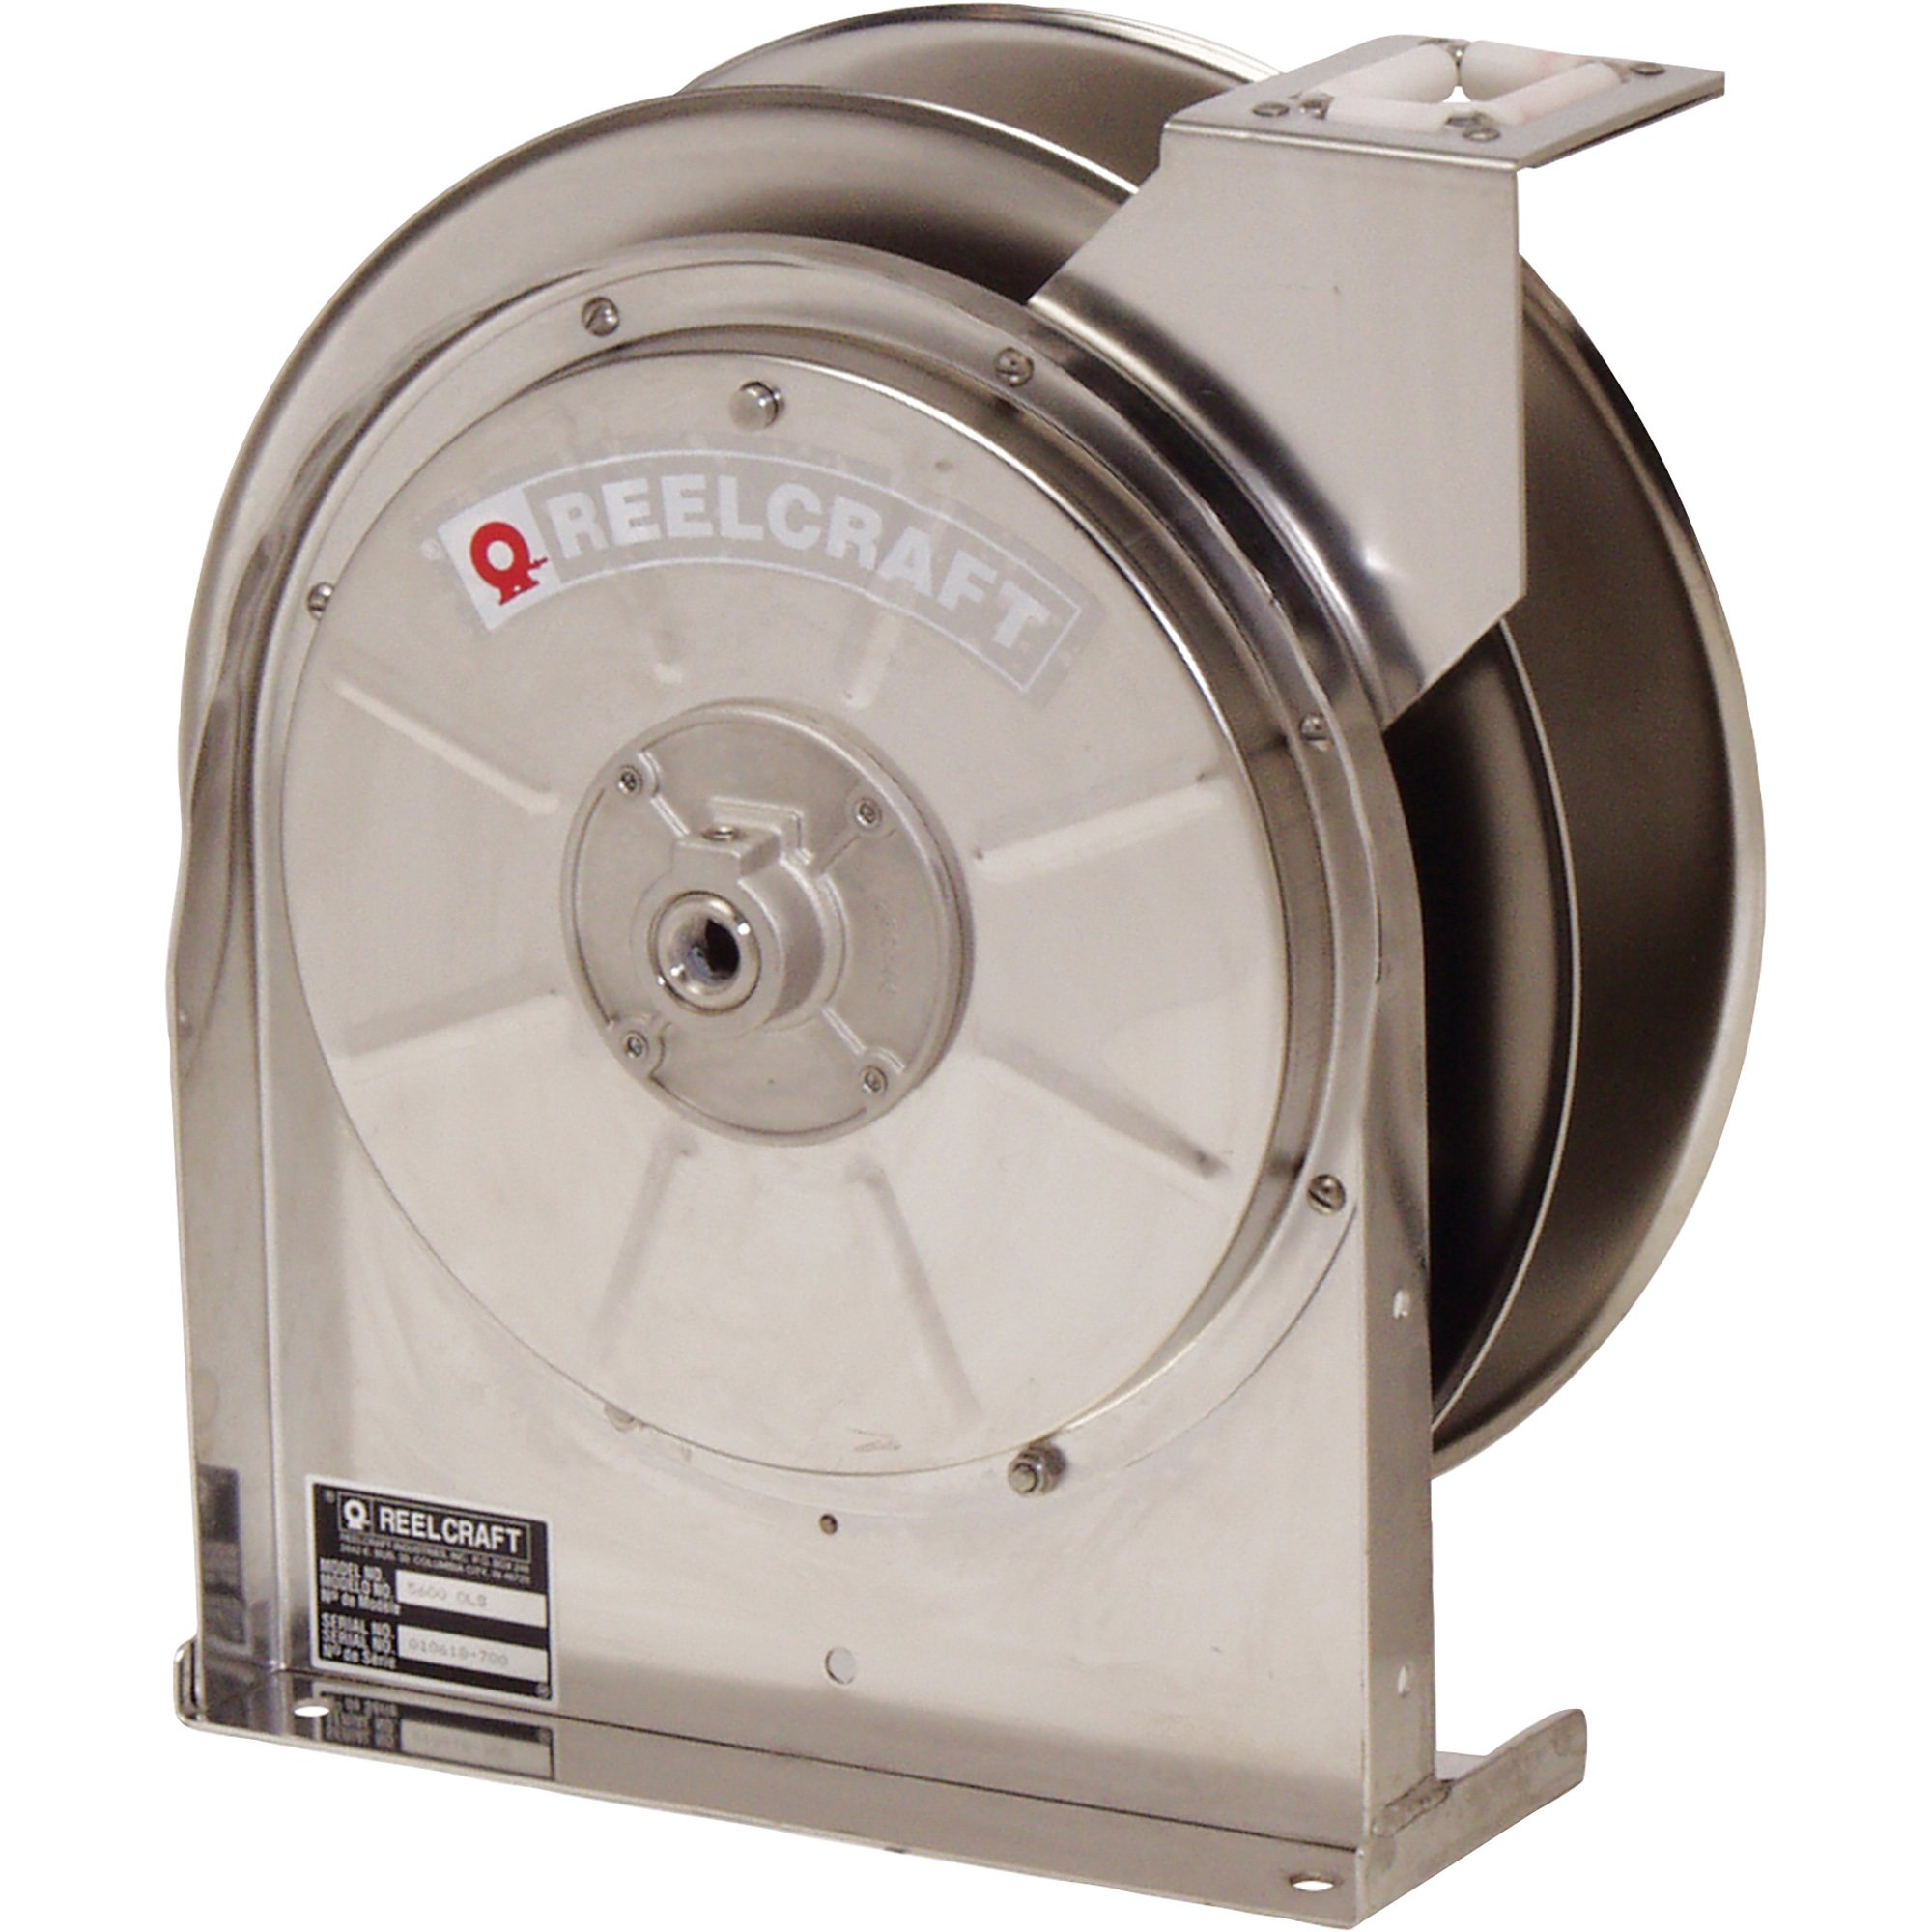 Reelcraft Spring Retractable Stainless Steel Air/Water Hose Reel — No Hose,  3/8in. x 35ft. Hose Capacity, 500 PSI, Model# 5600 OLS